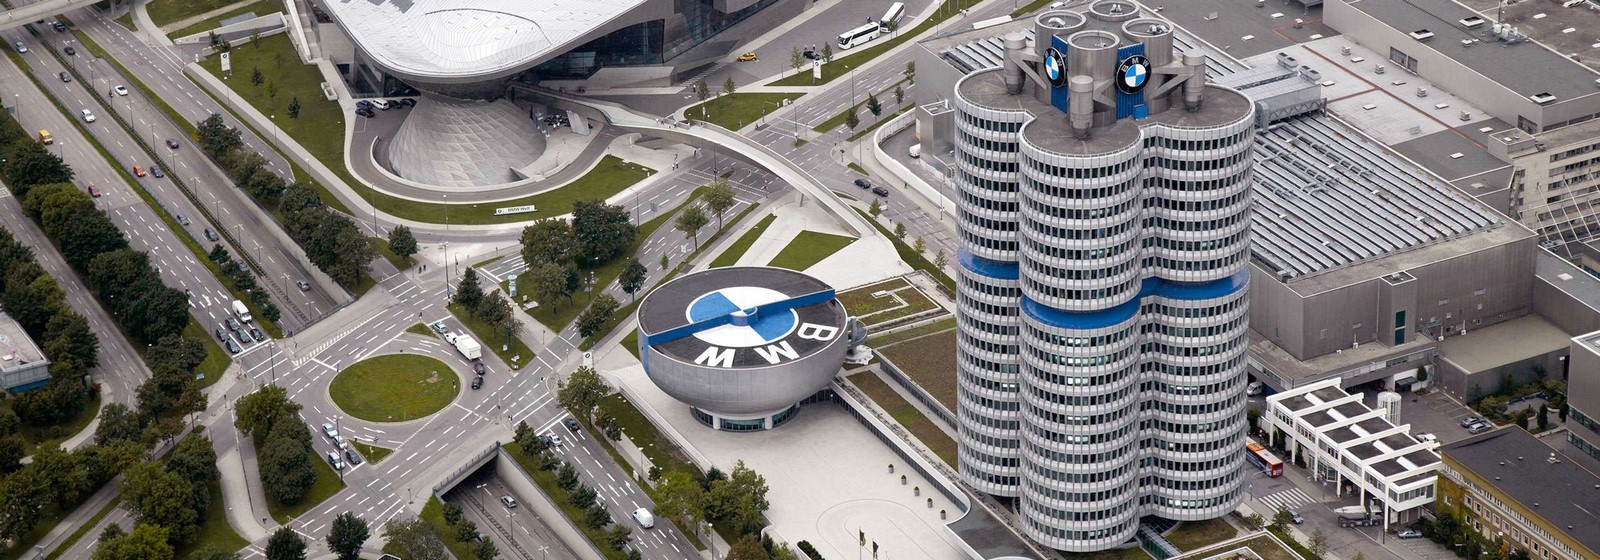 10 Things you did not know about BMW - Sheet6